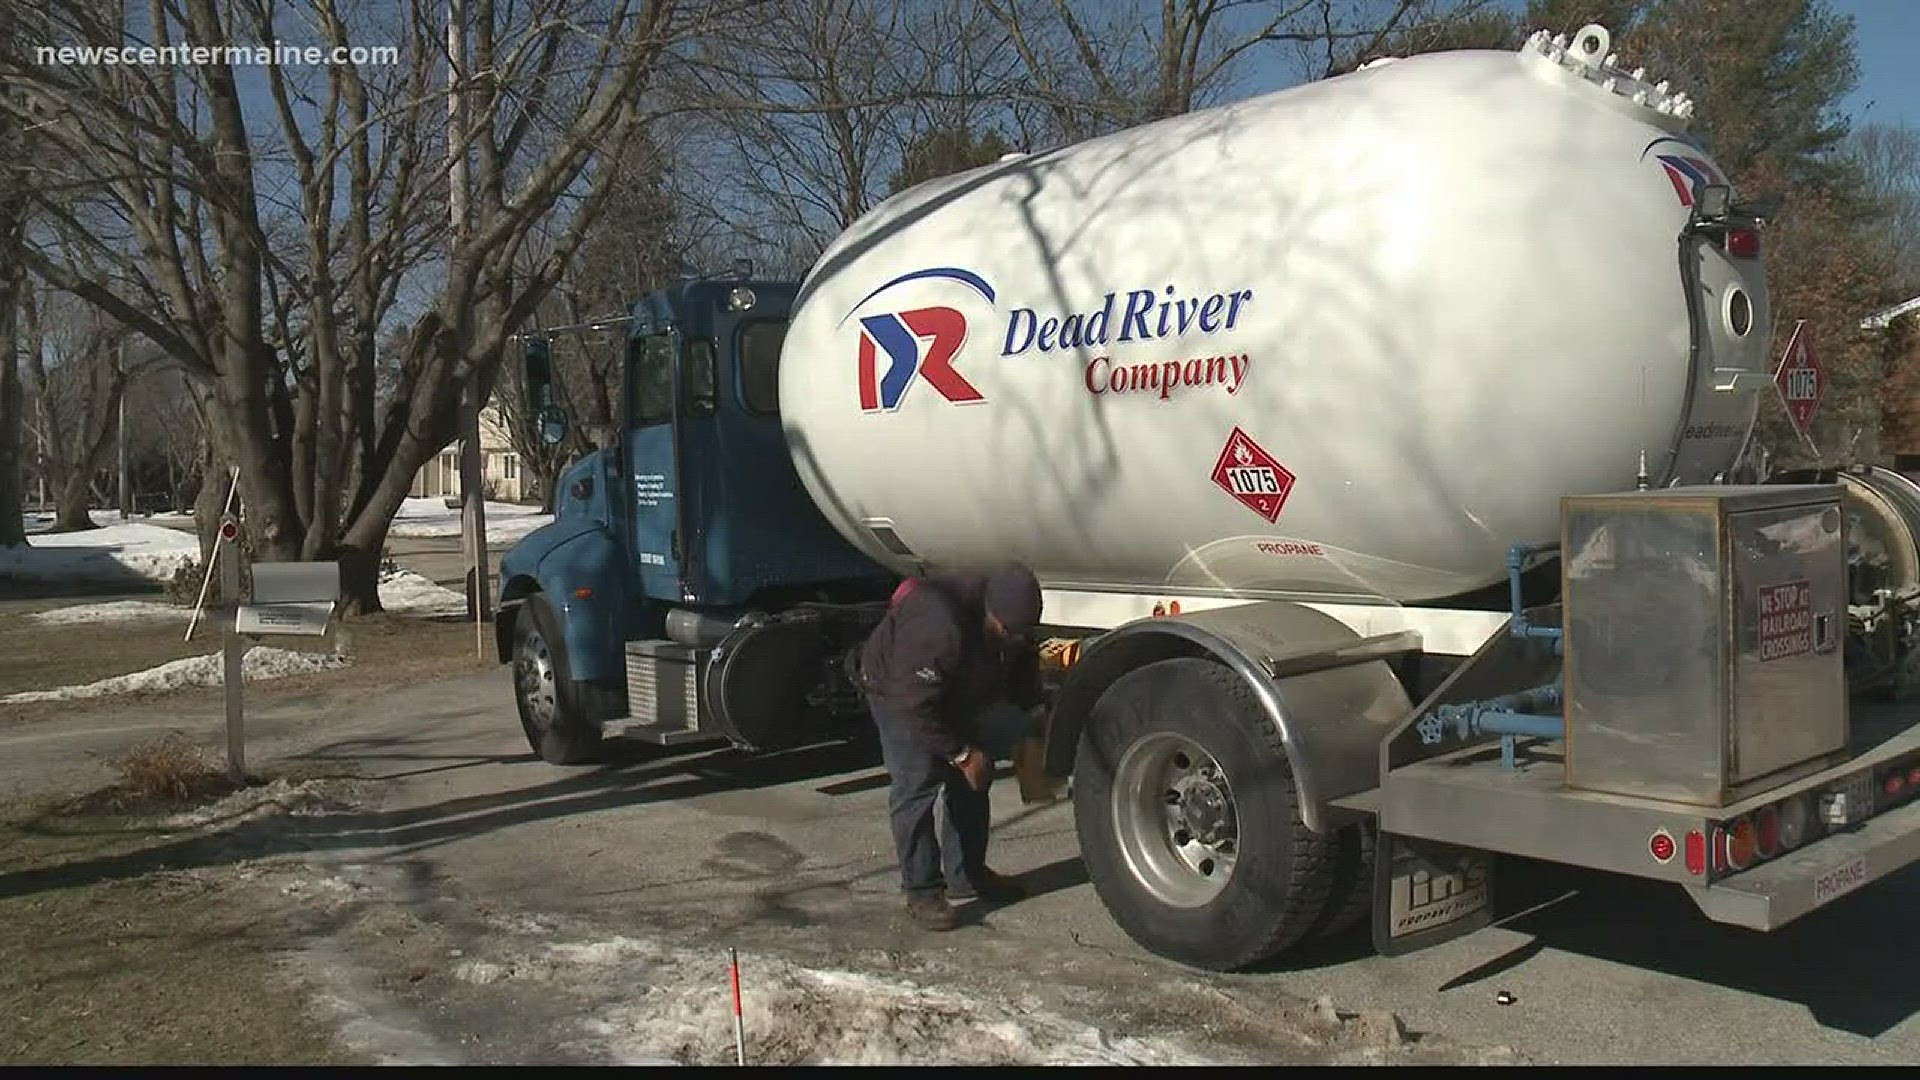 Propane companies warn customers to schedule deliveries early